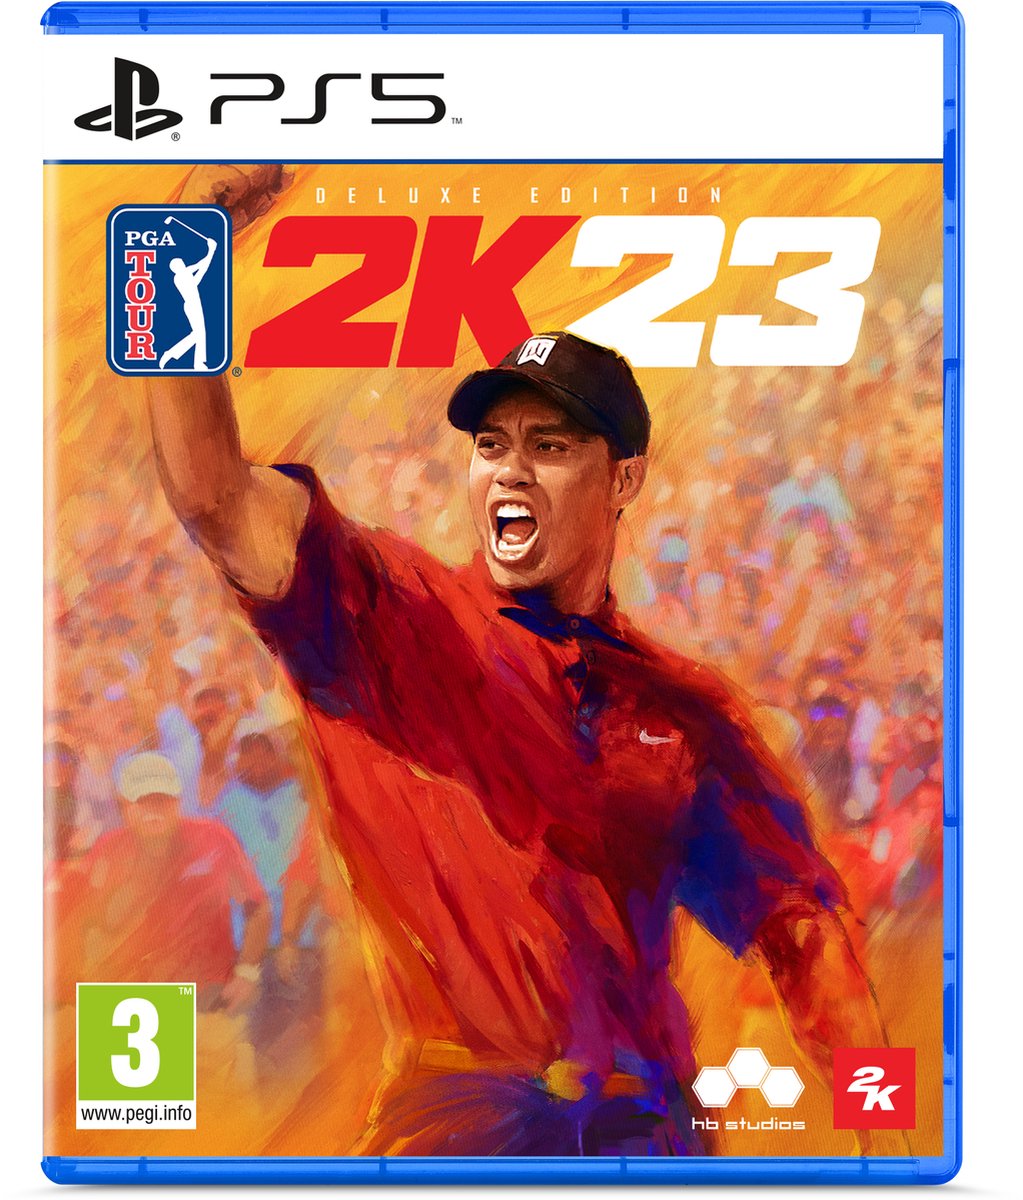 PGA Tour 2K23 - Deluxe Edition (PS5), 2K Sports